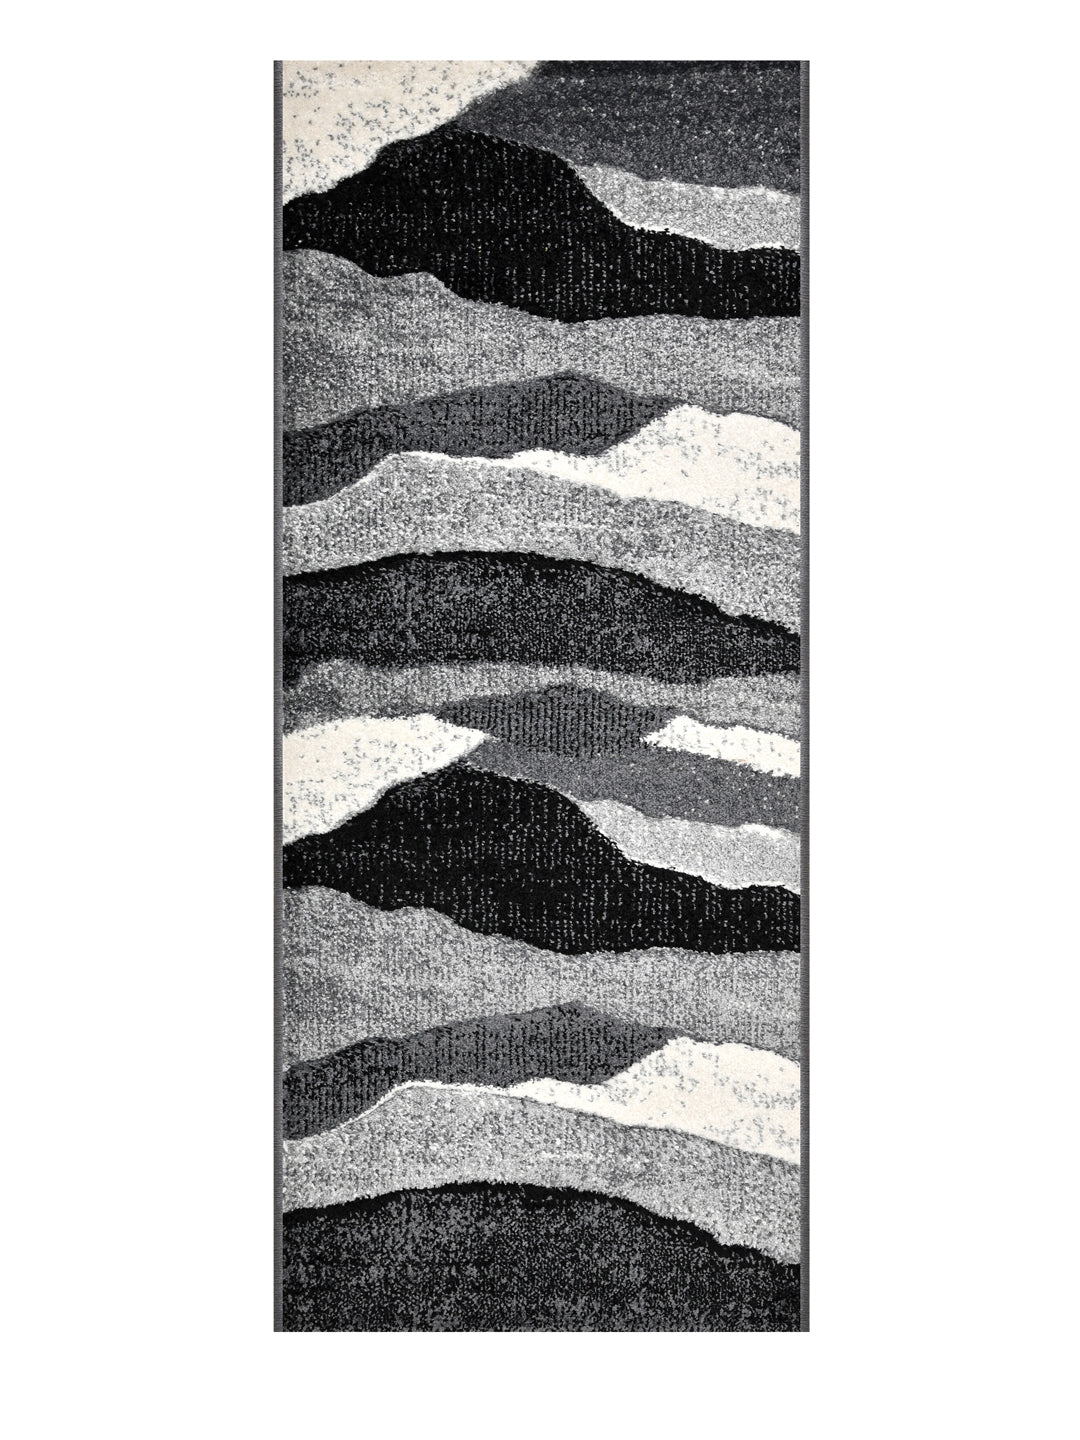 Bedside Runner Carpet Rug With Anti Skid Backing; 57x140 cms; Grey White Abstract